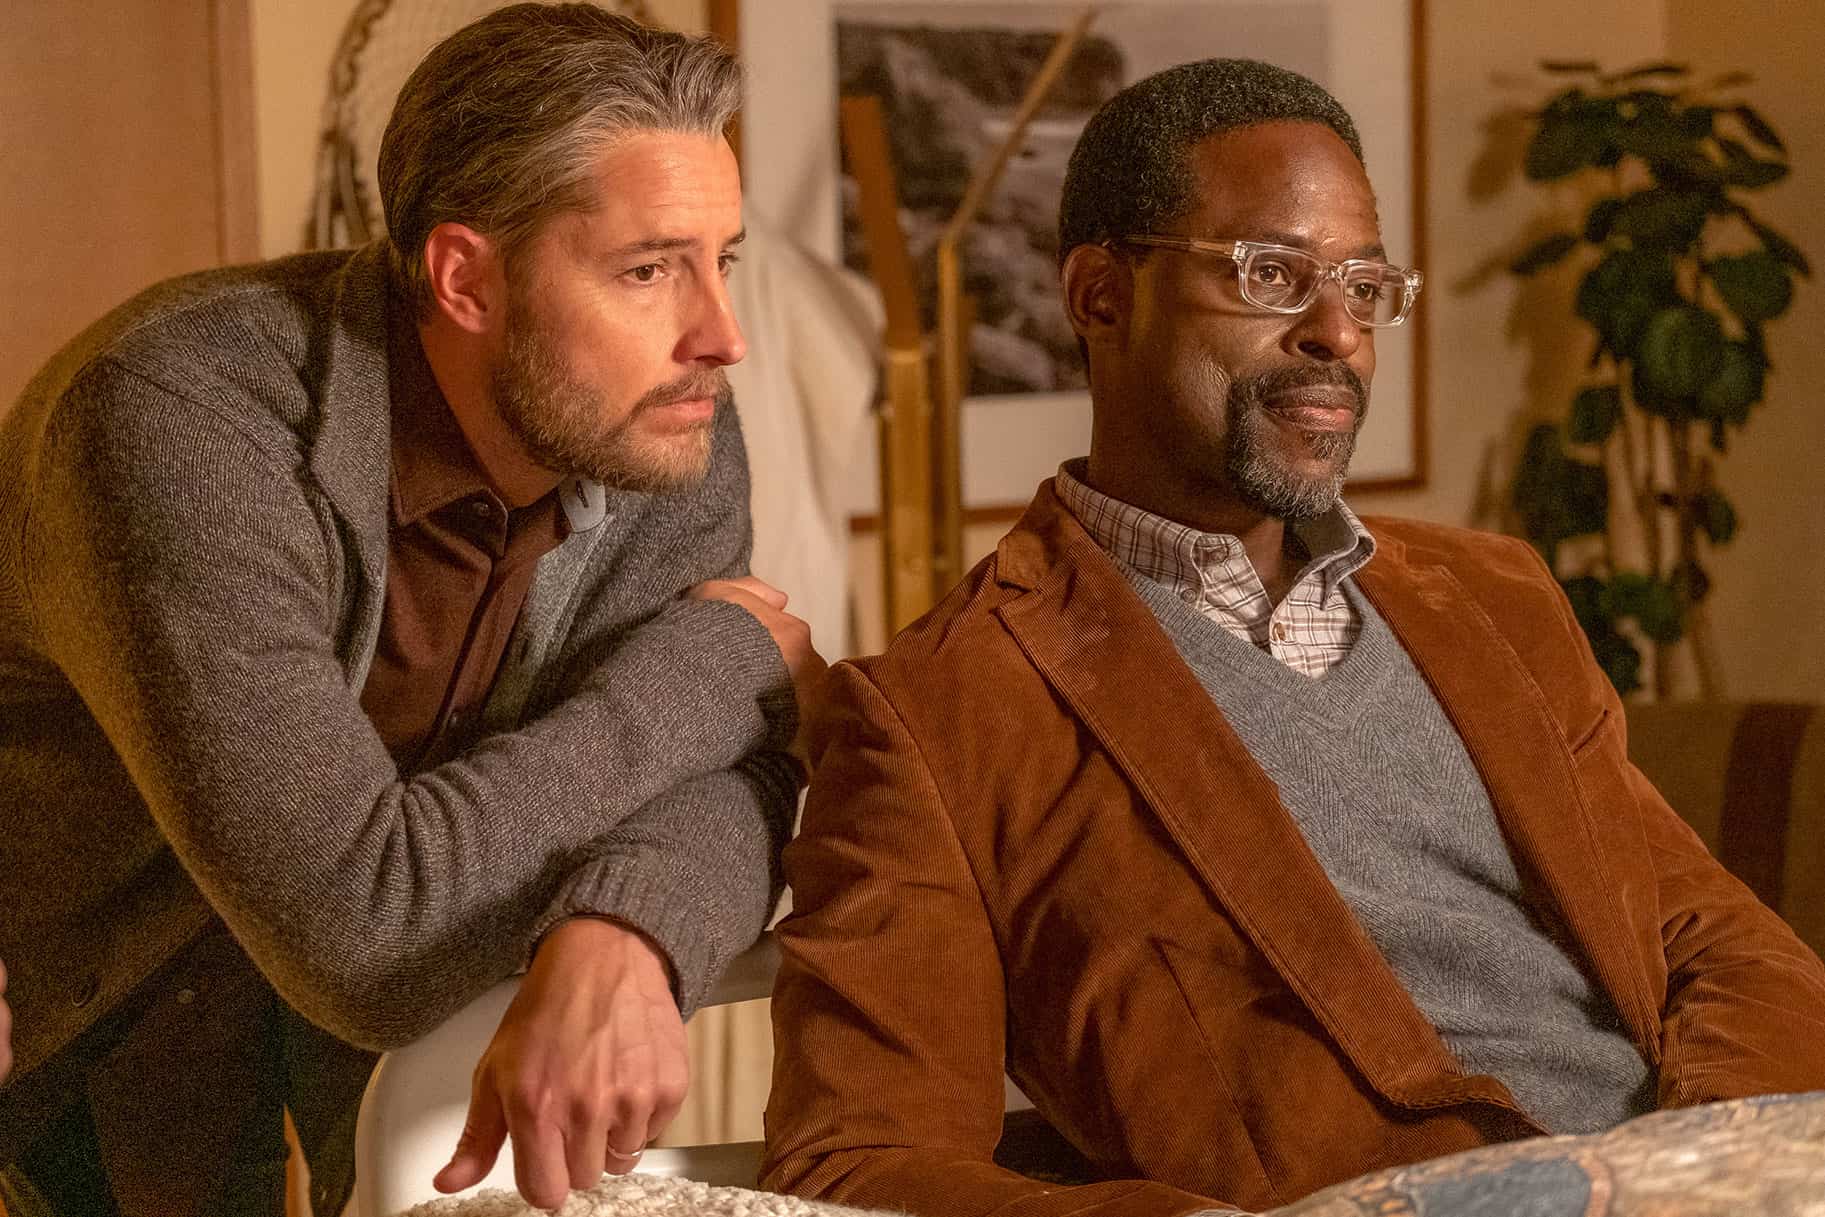 Randall and Kevin together in the show, This Is Us (Credits: NBC)